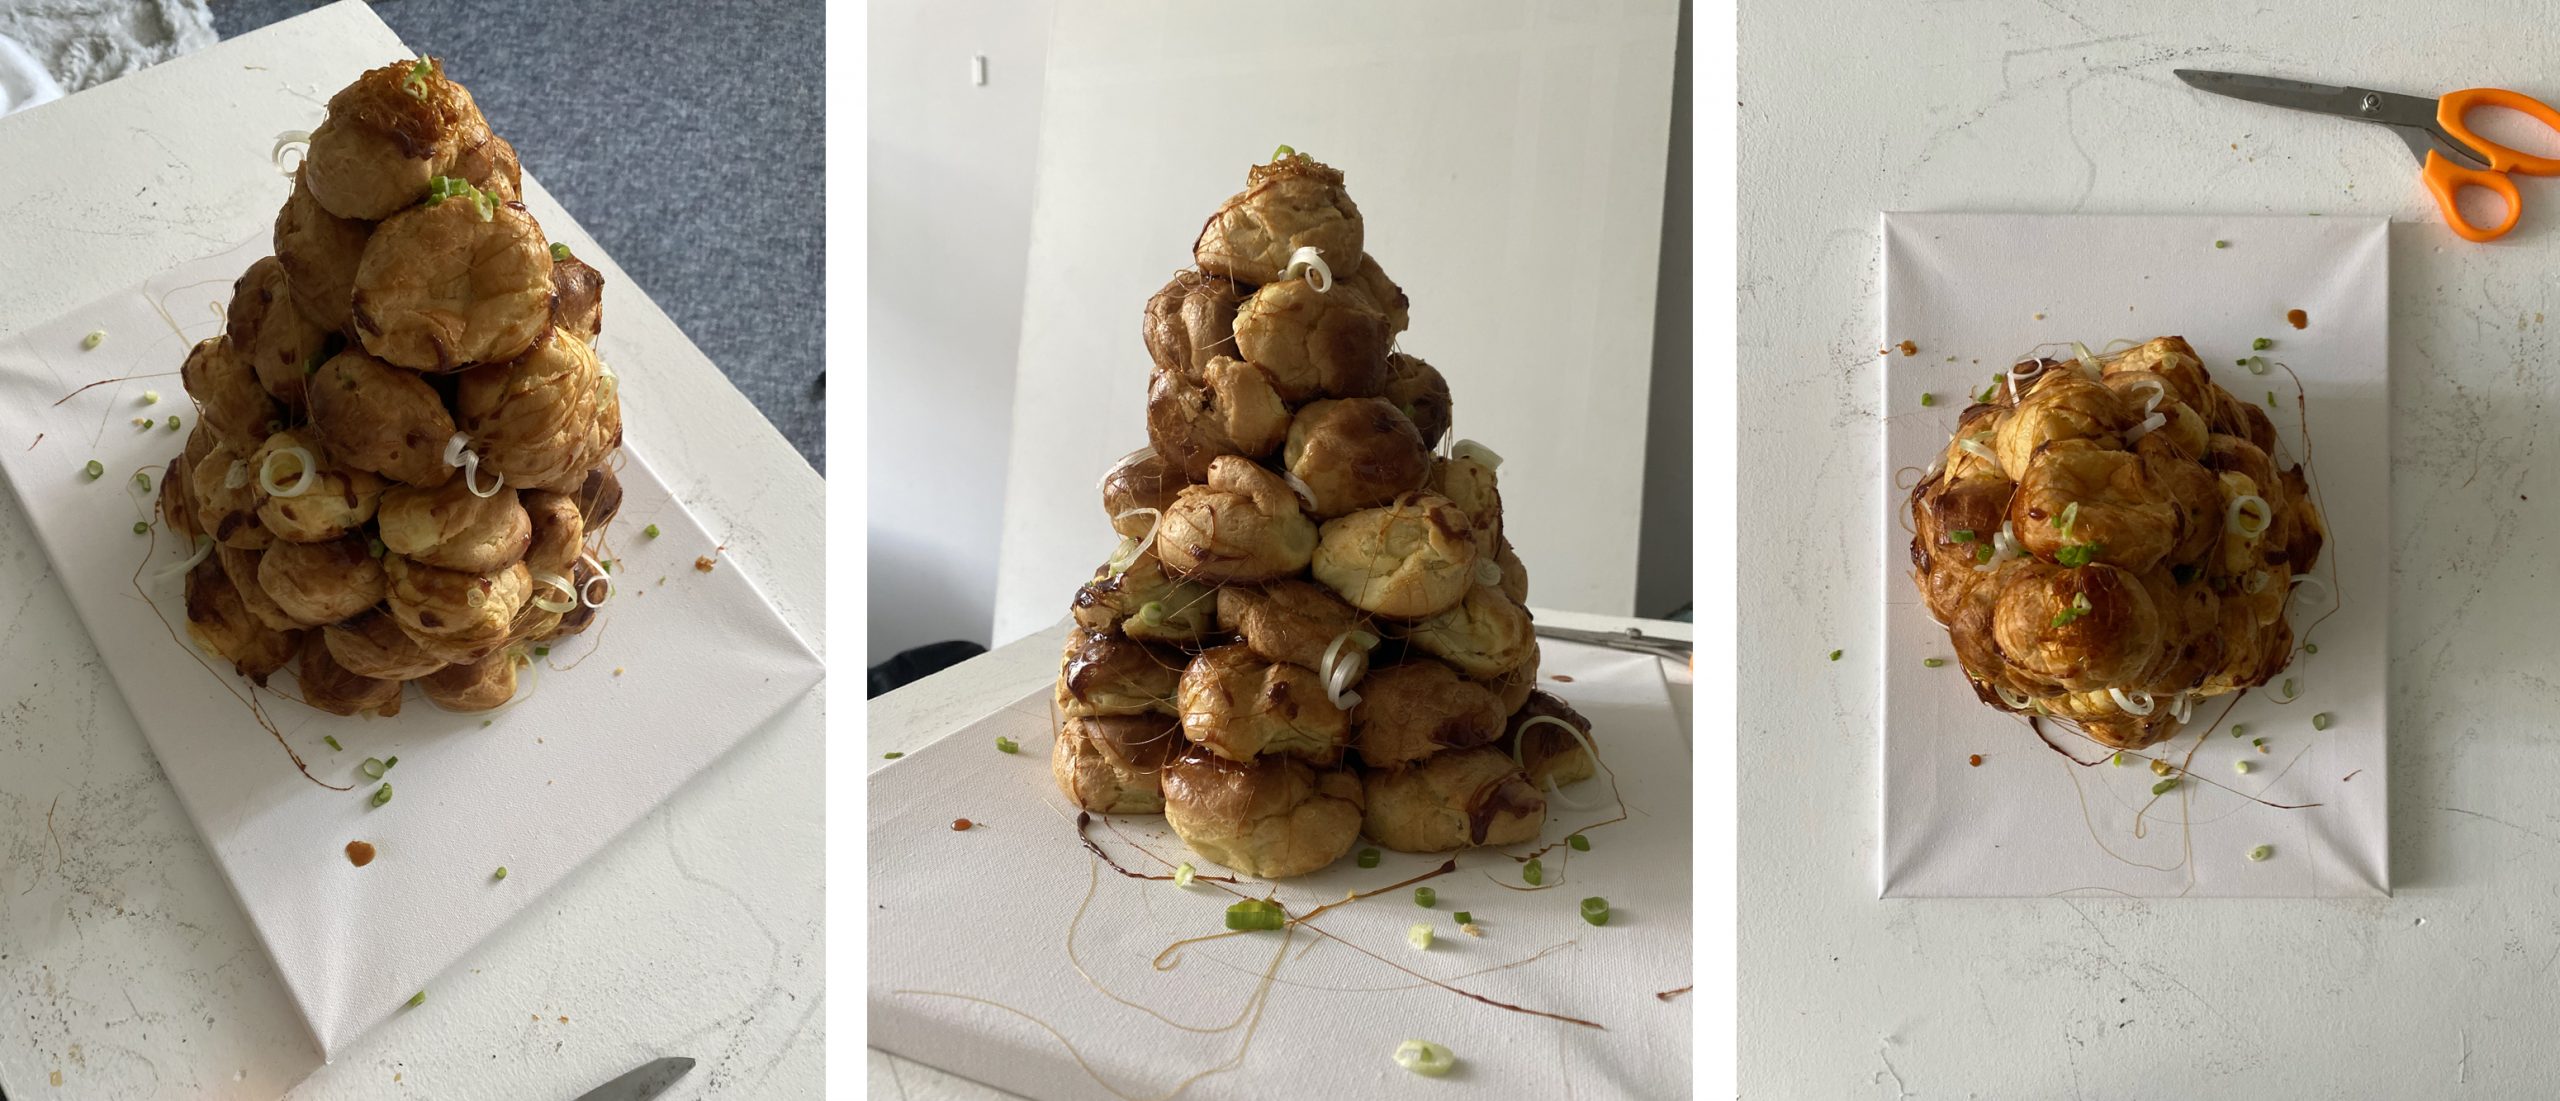 three angles on the savoury croquembouche, in its whole form, made by the artist